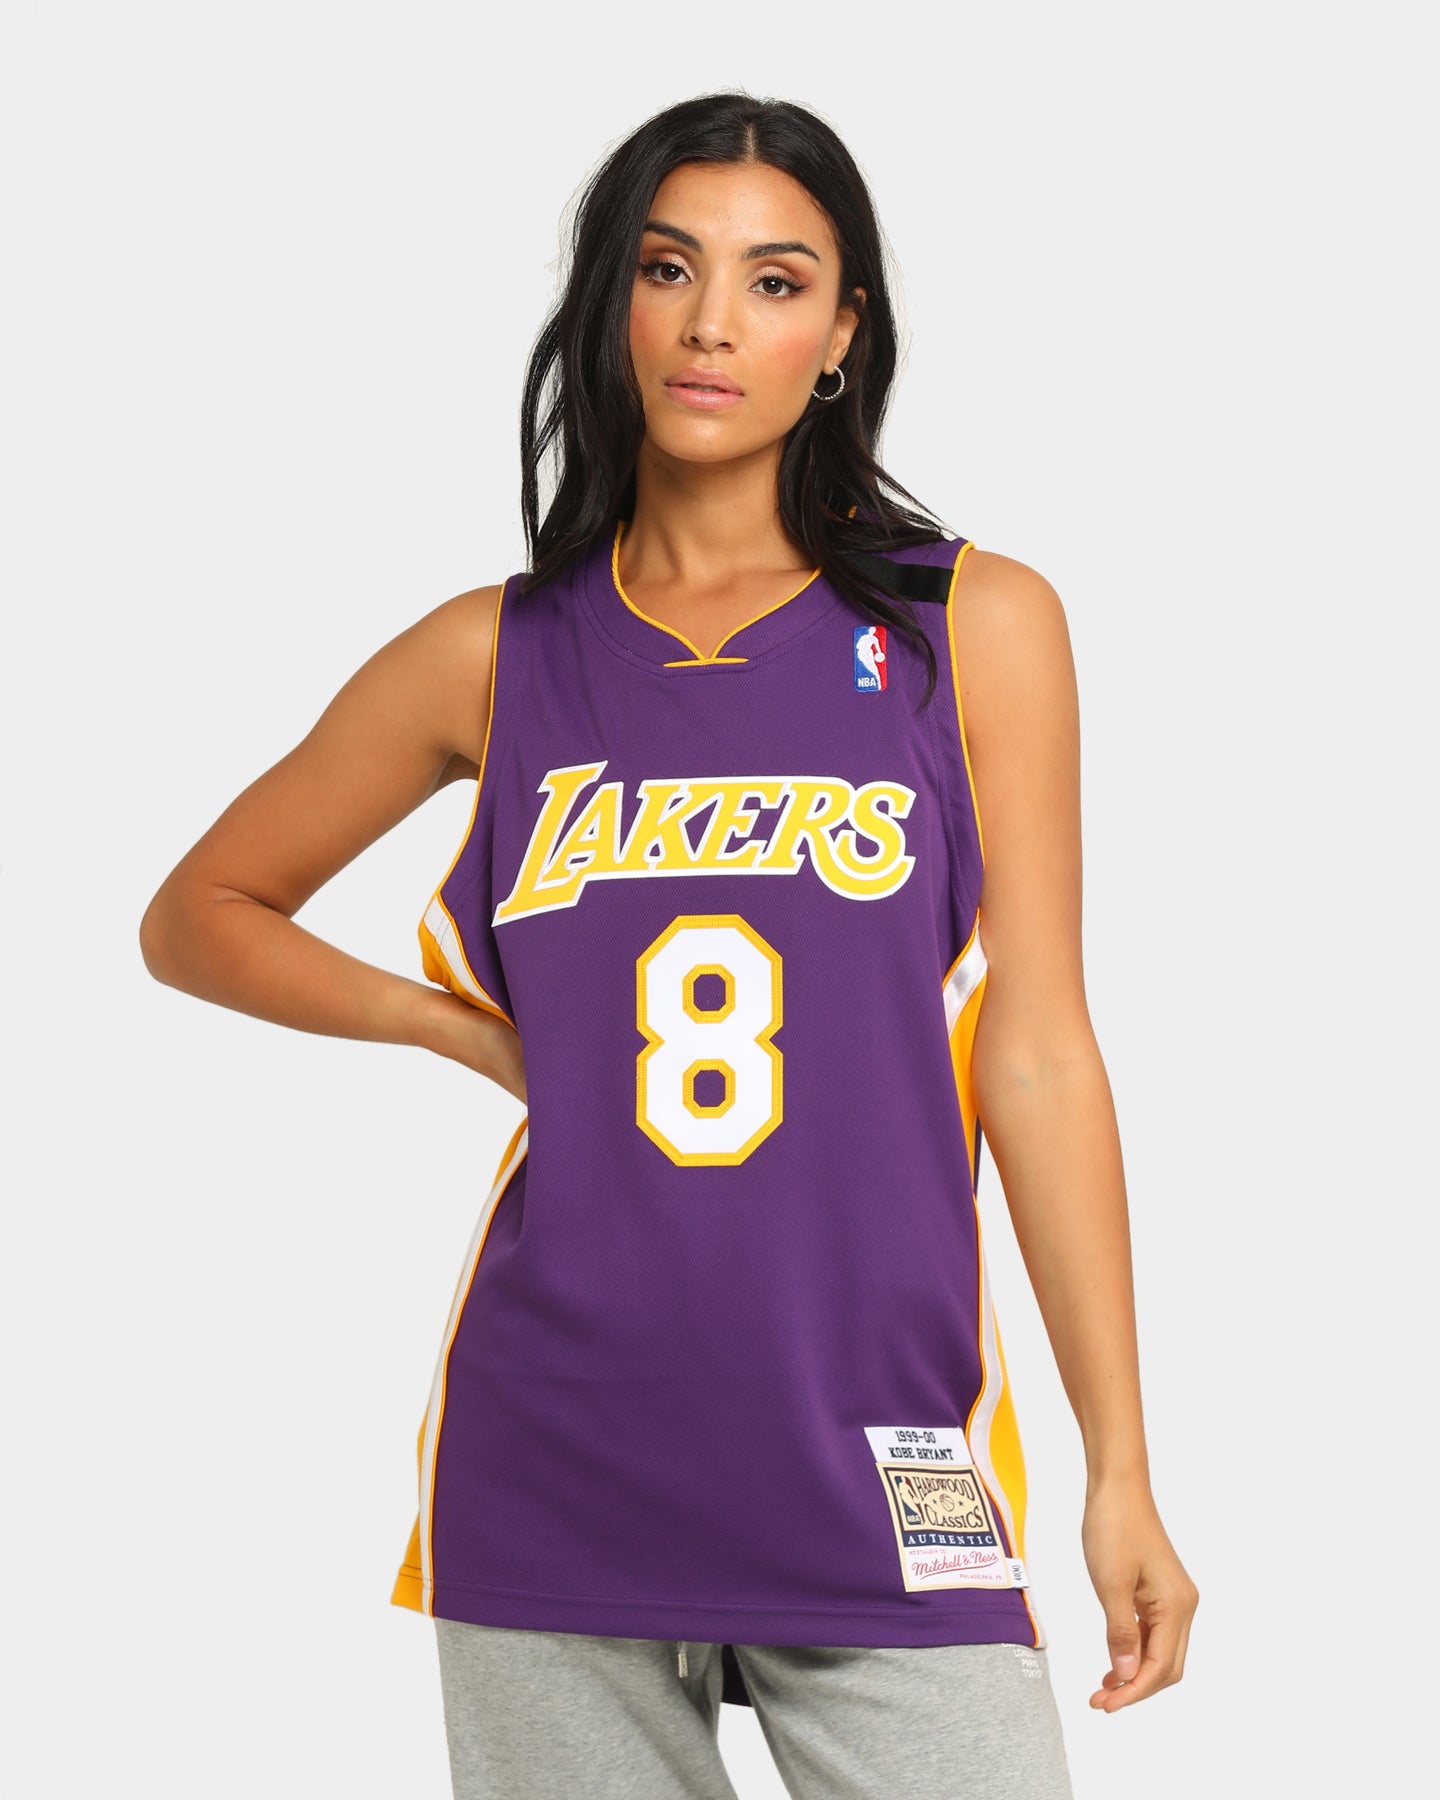 lakers girl jersey